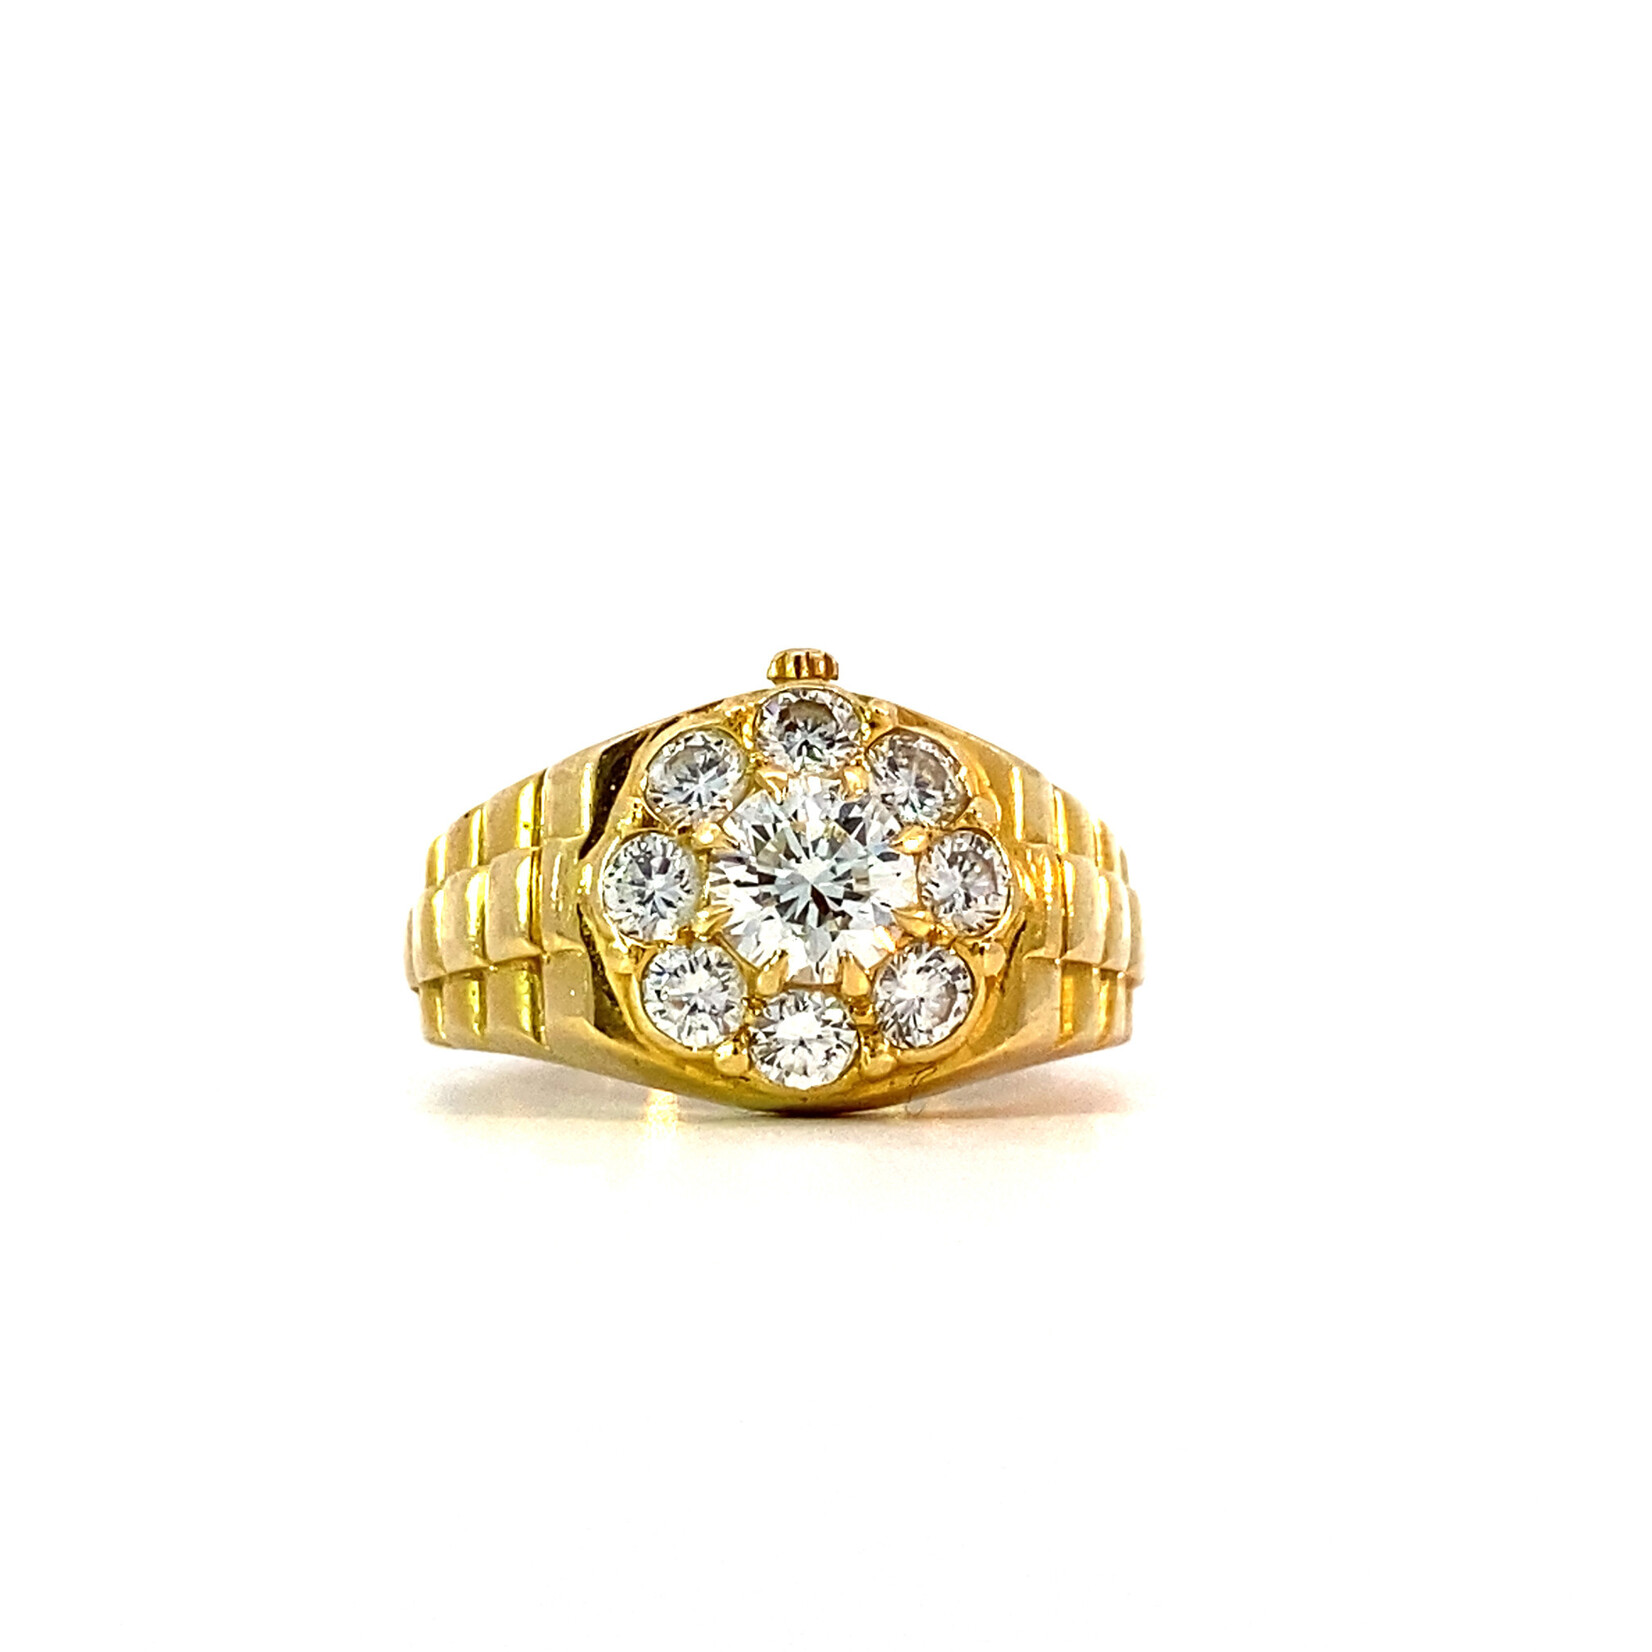 22K Yellow Gold Watch style Diamond Ring D1.10cttw size 7.25